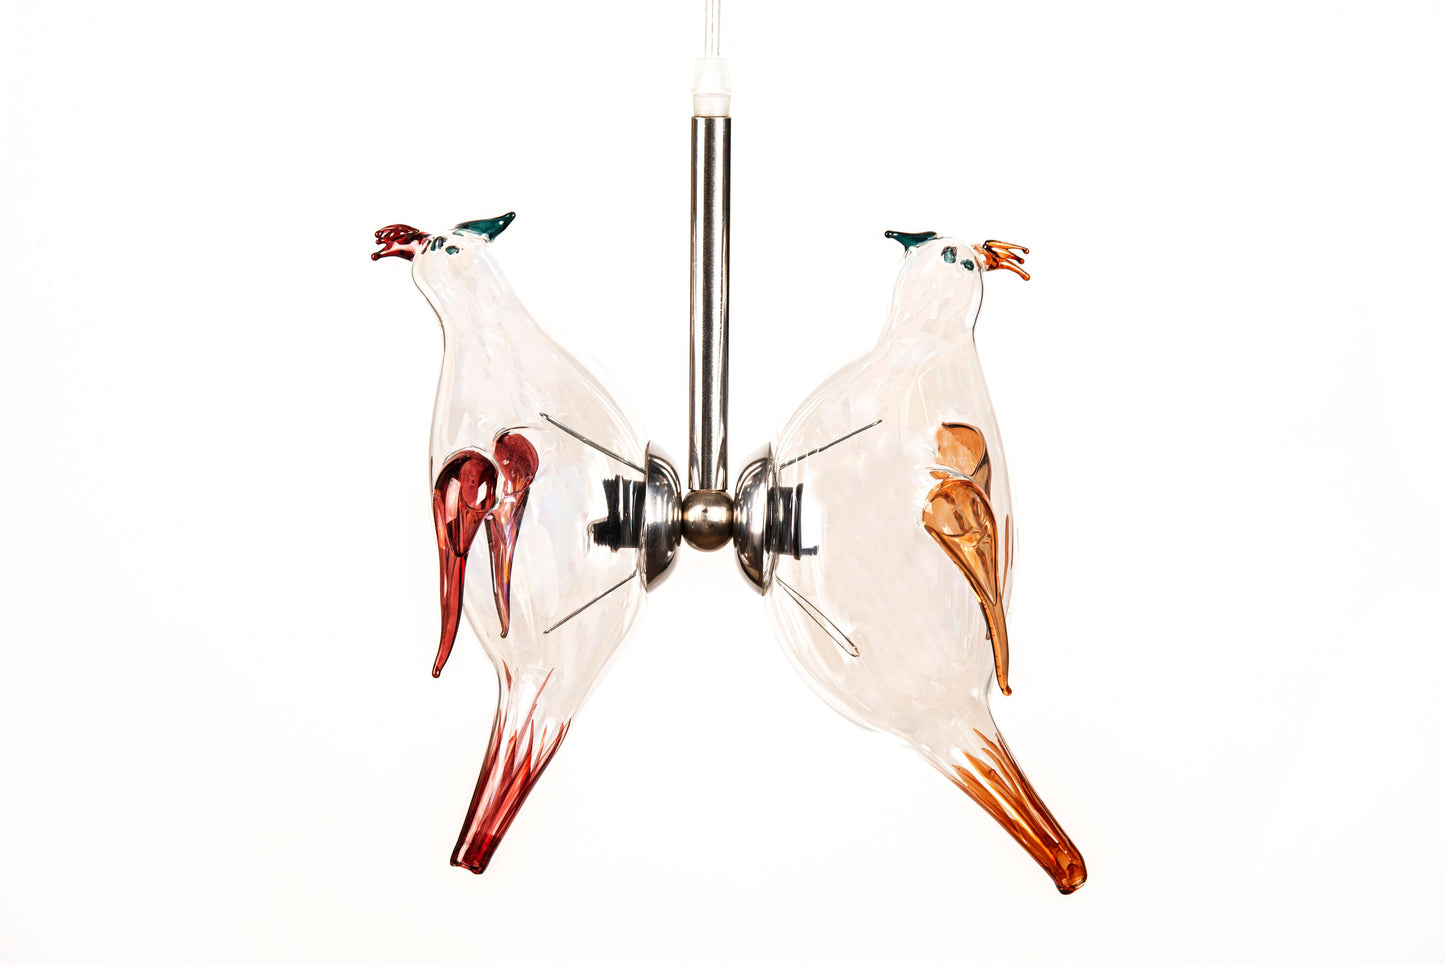 Handmade Birds Twin Hanging Lamp for Dining Room Lights - Les Trois Pyramides